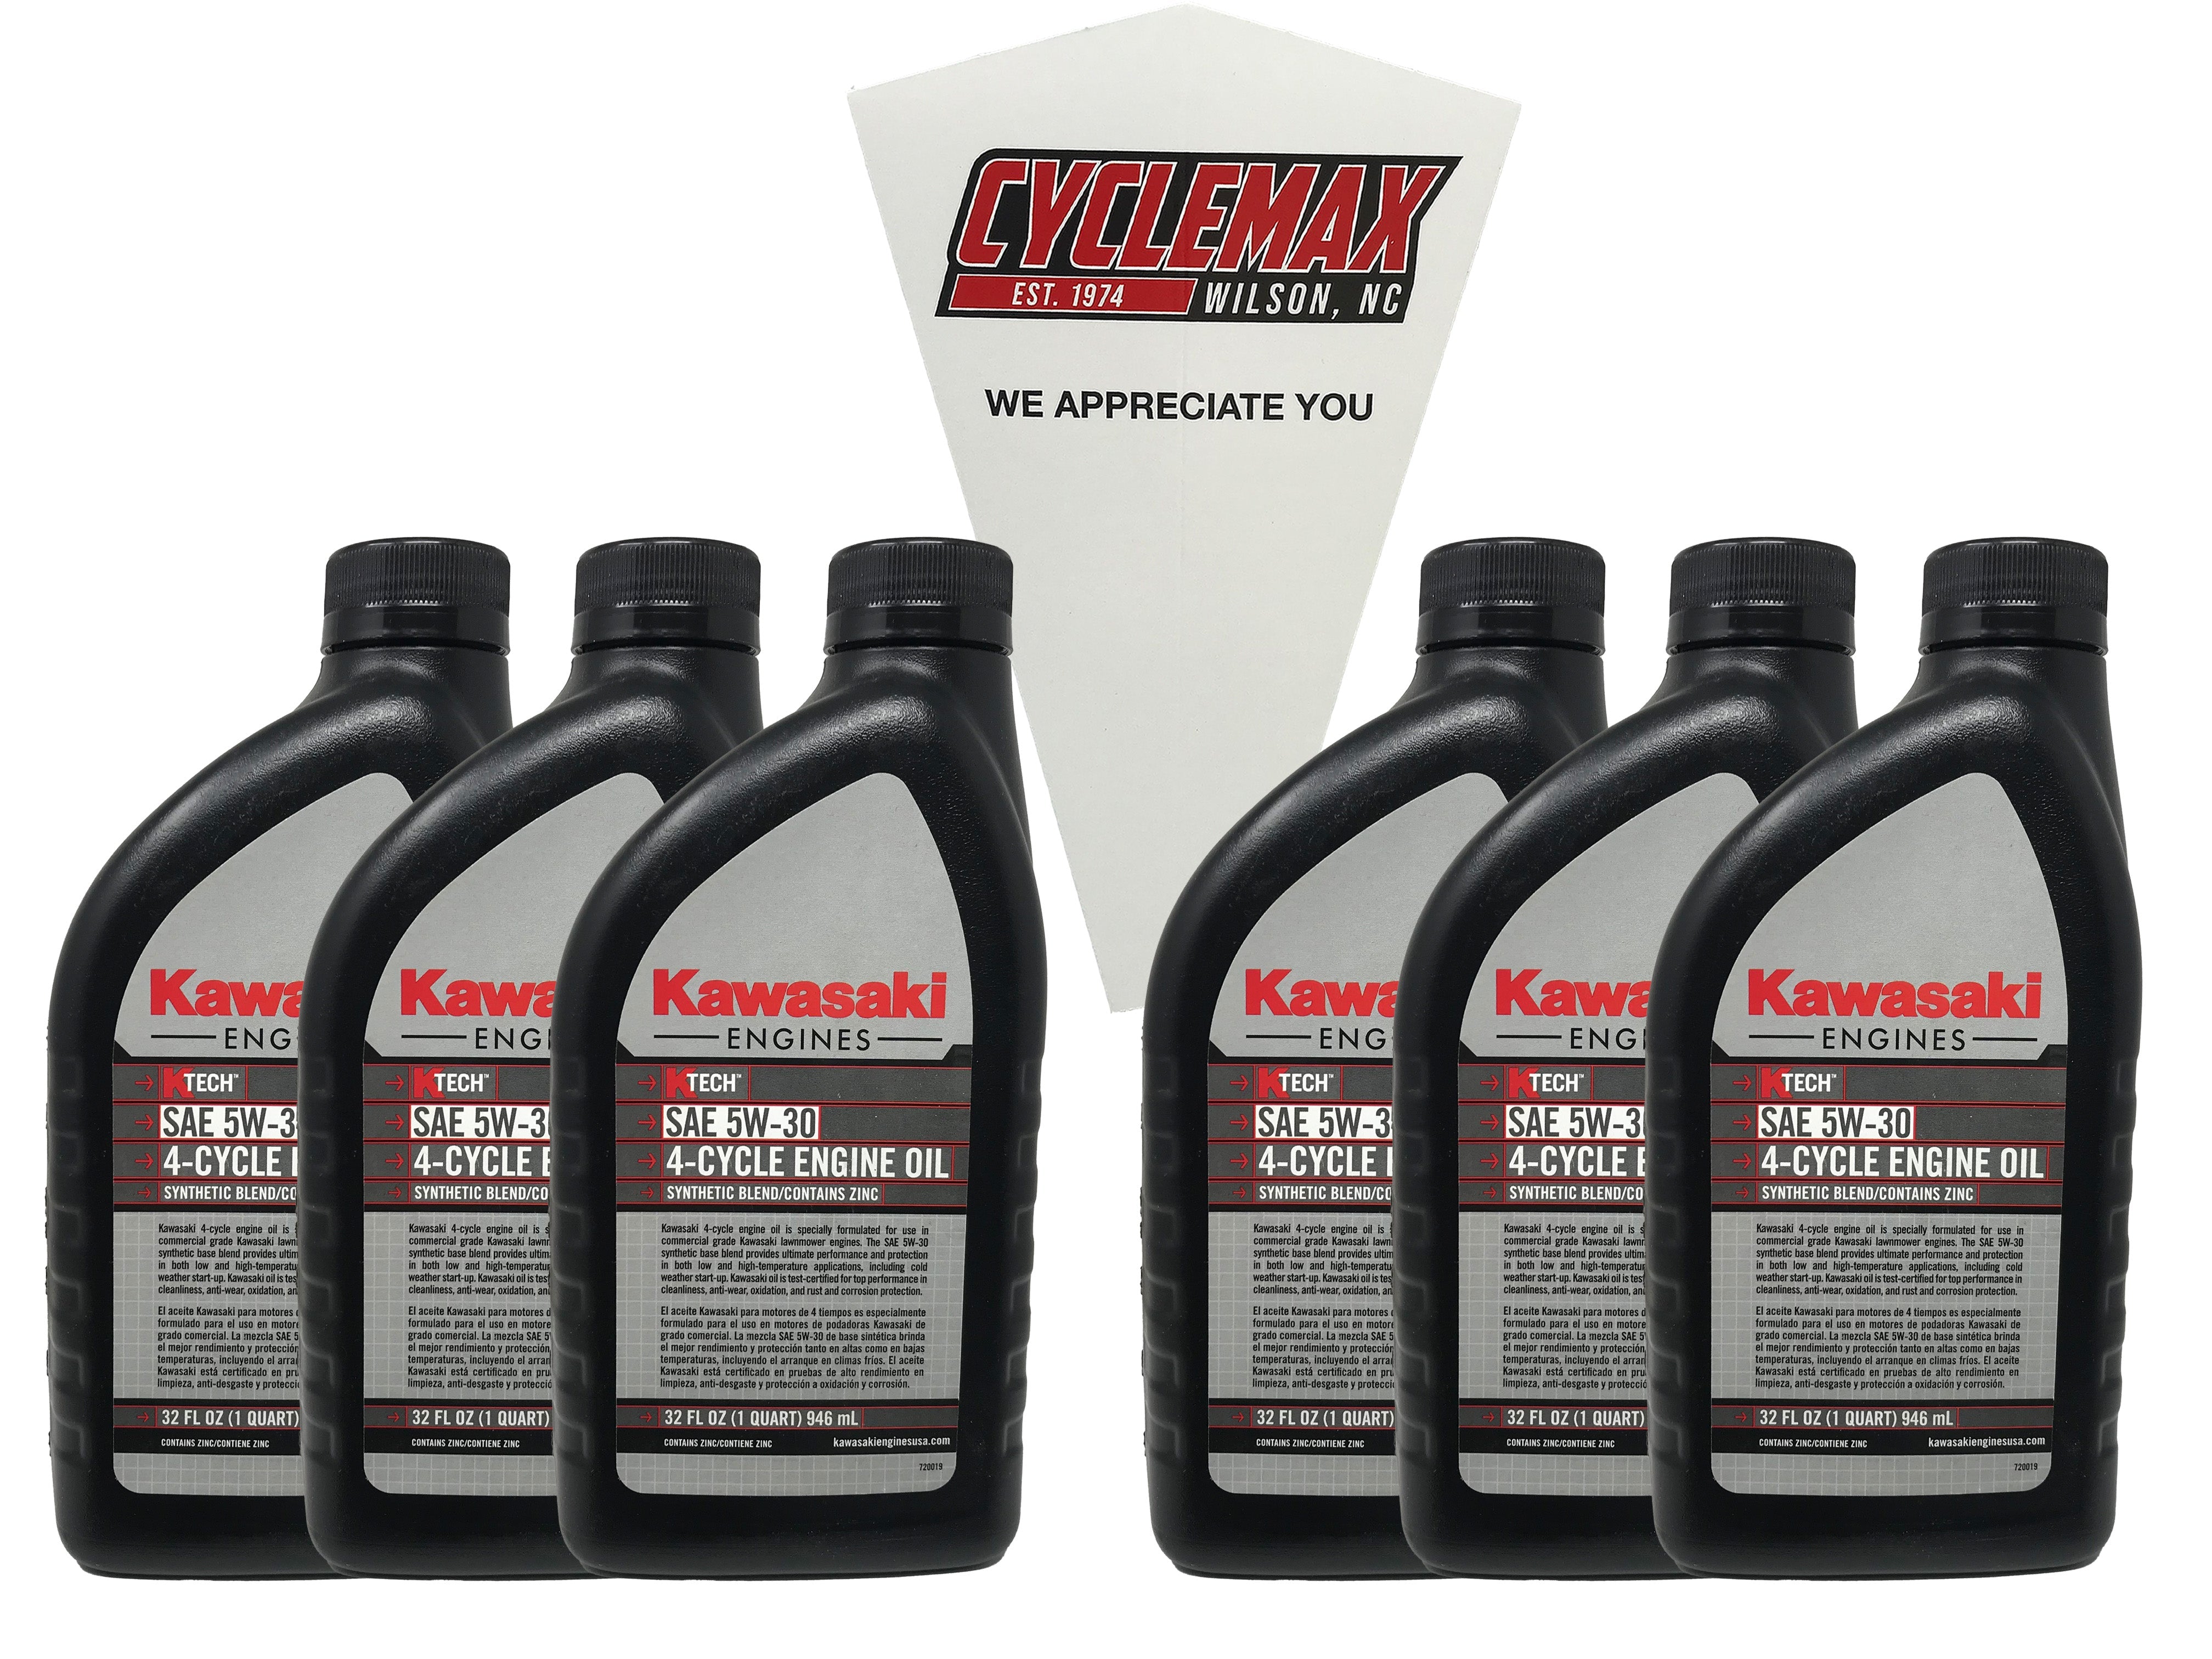 Cyclemax Six Pack for Kawasaki 4 Cycle 5W-30 K-Tech Lawnmower Engine Oil 99969-6500 Contains Six Quarts and a Funnel